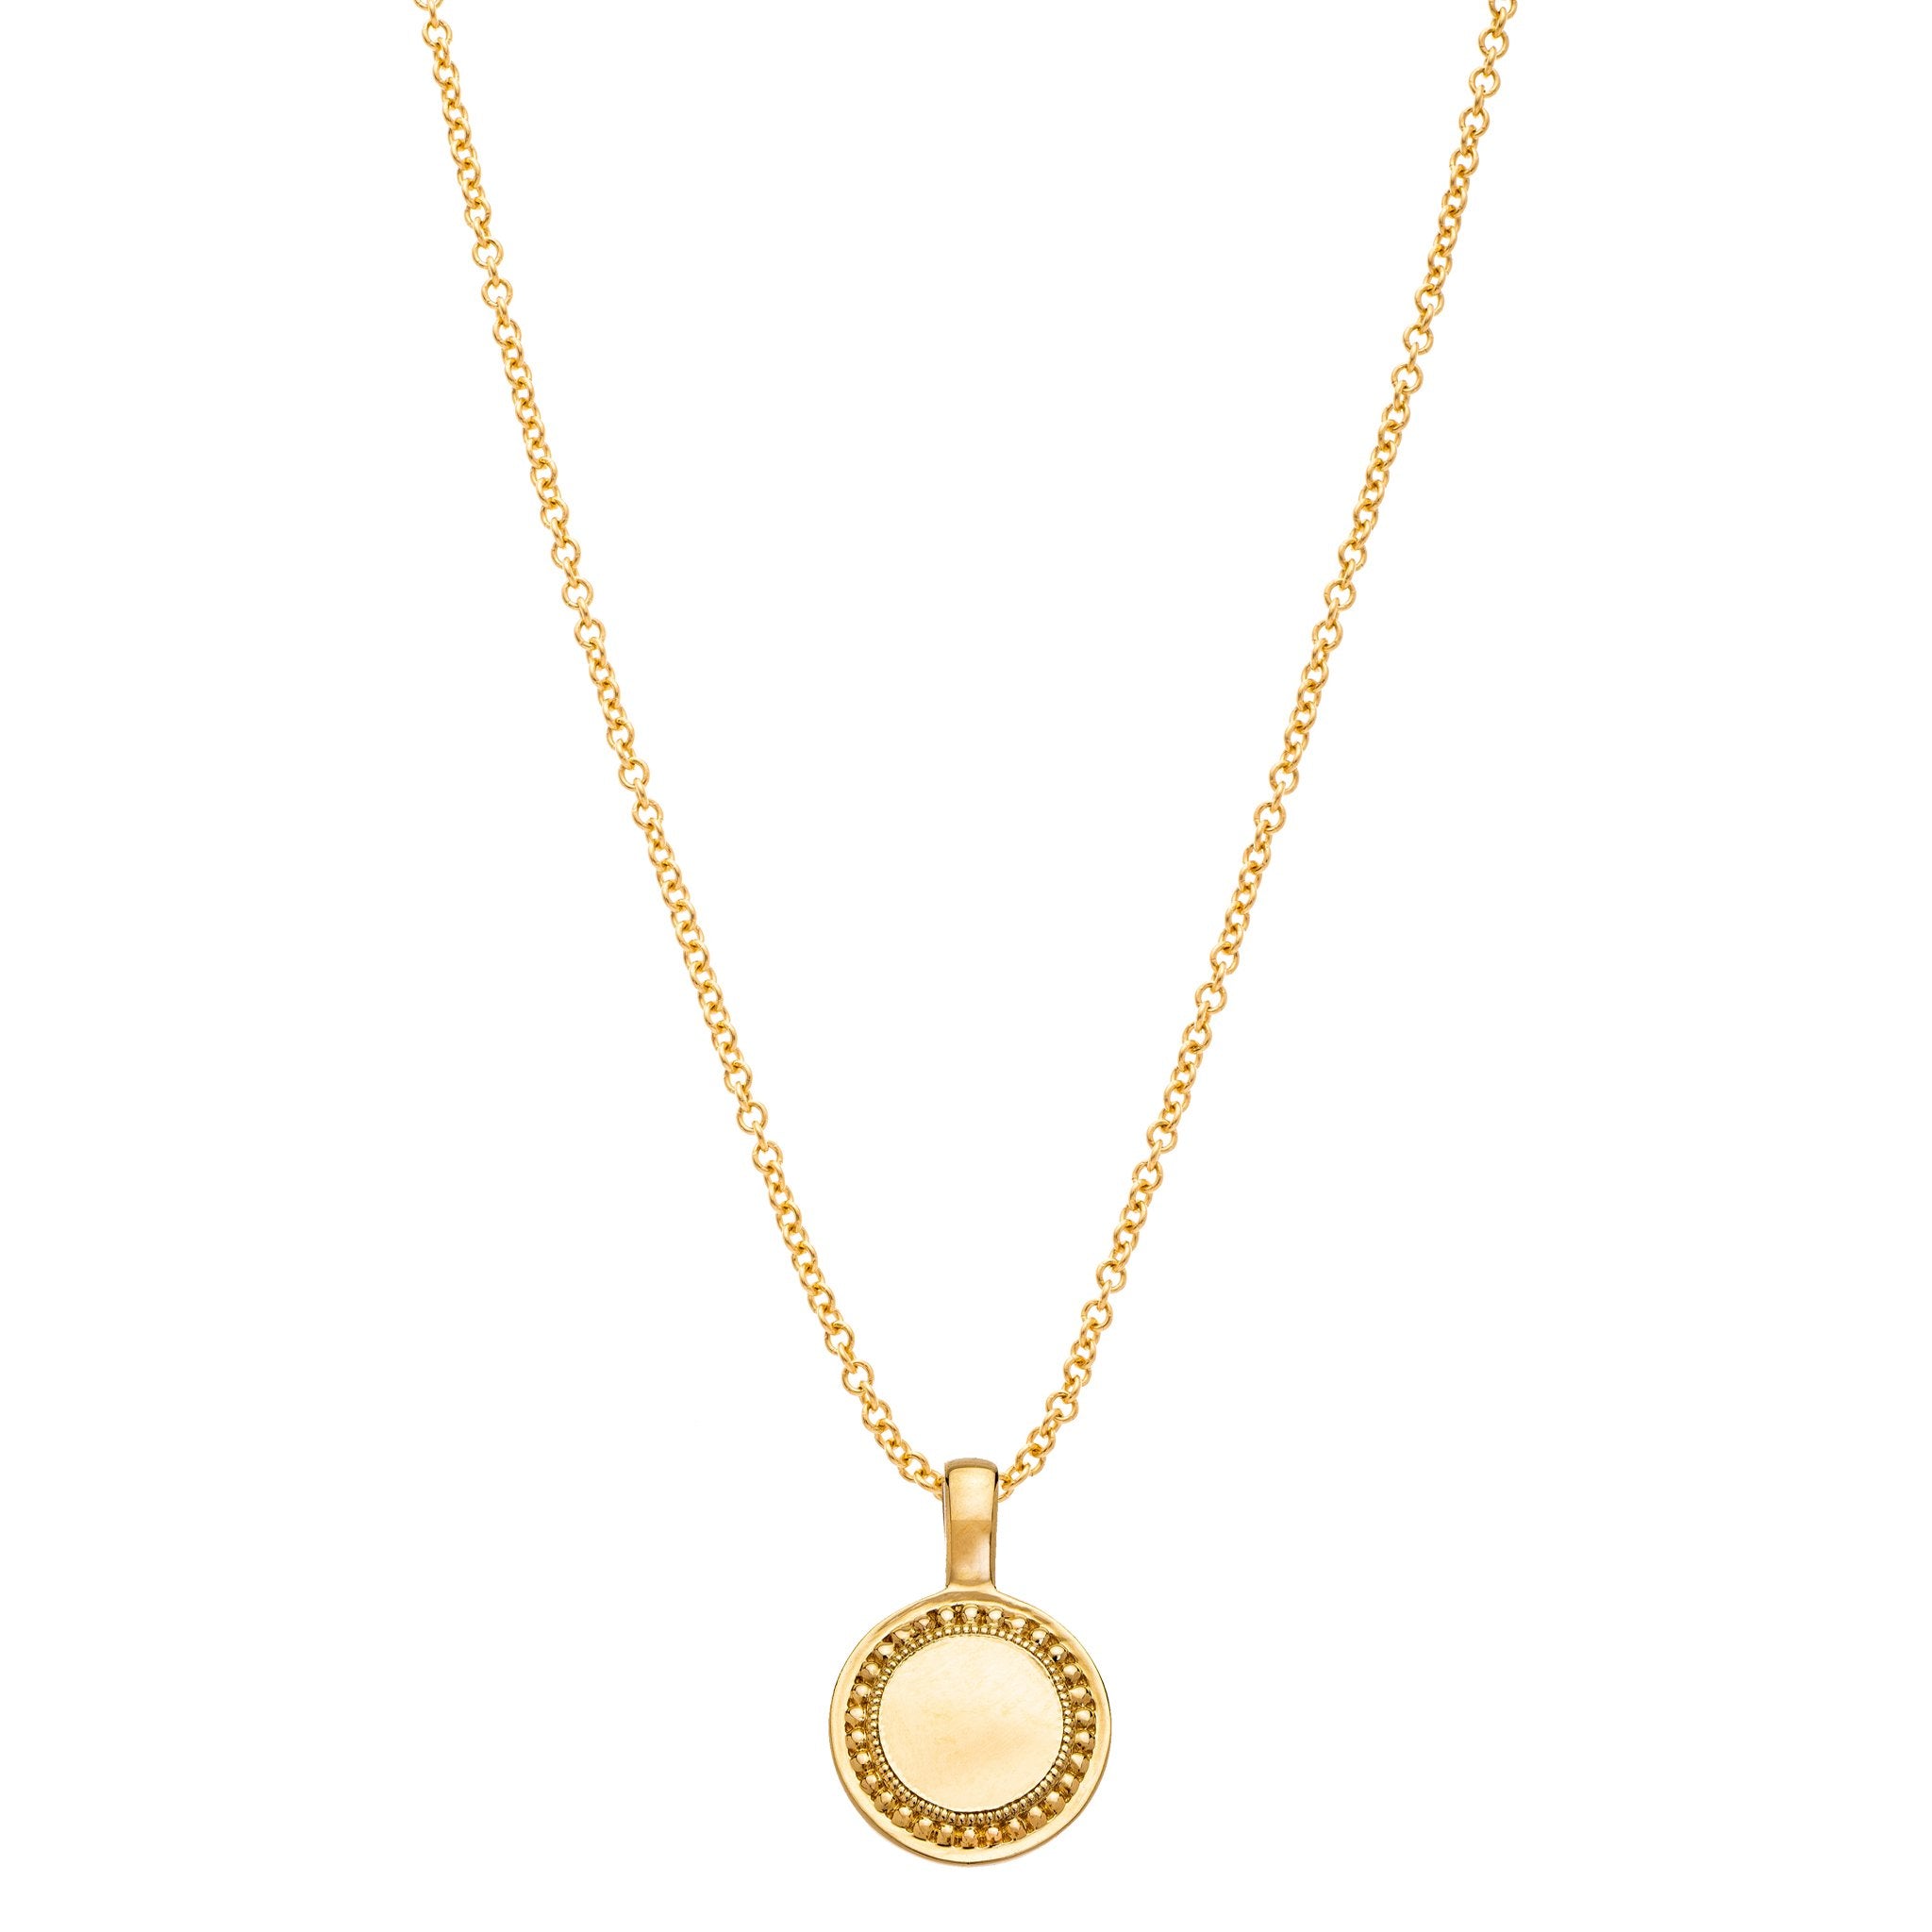 P.S. Small Yellow Gold Round Charm on Oval Link Chain